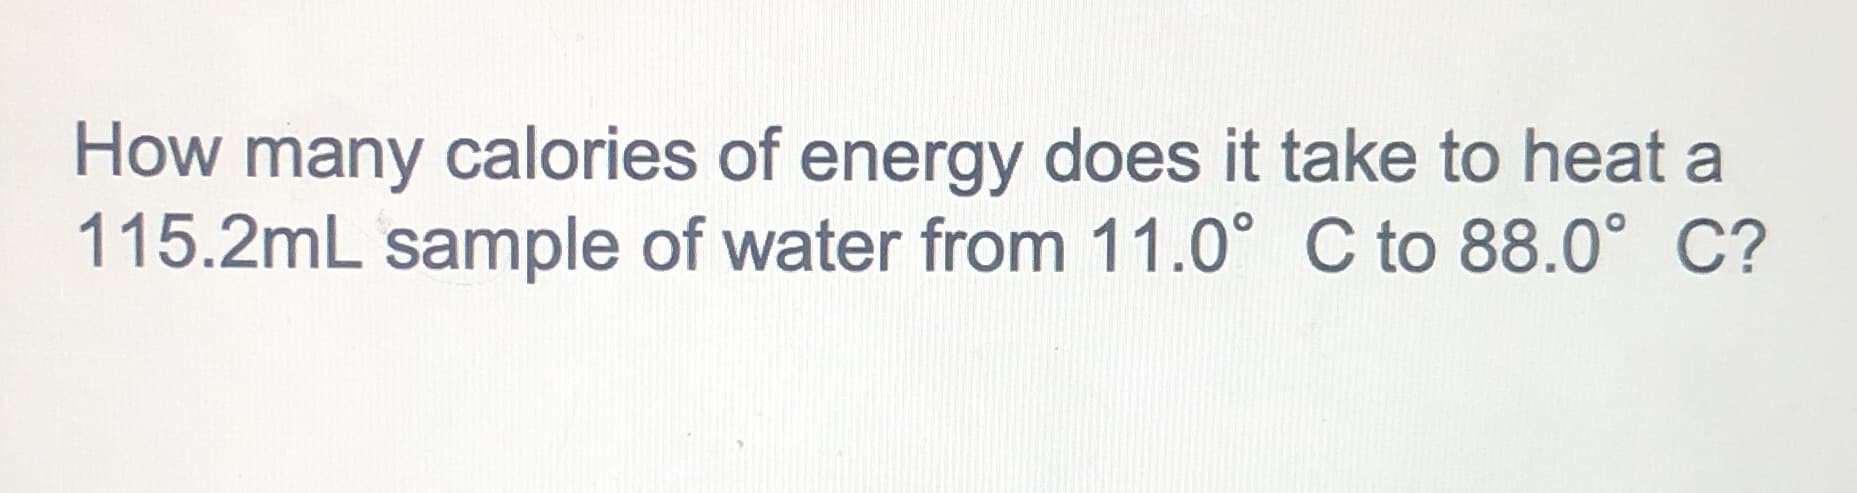 How many calories of energy does it take to heat a
115.2mL sample of water from 11.0° C to 88.0° C?
